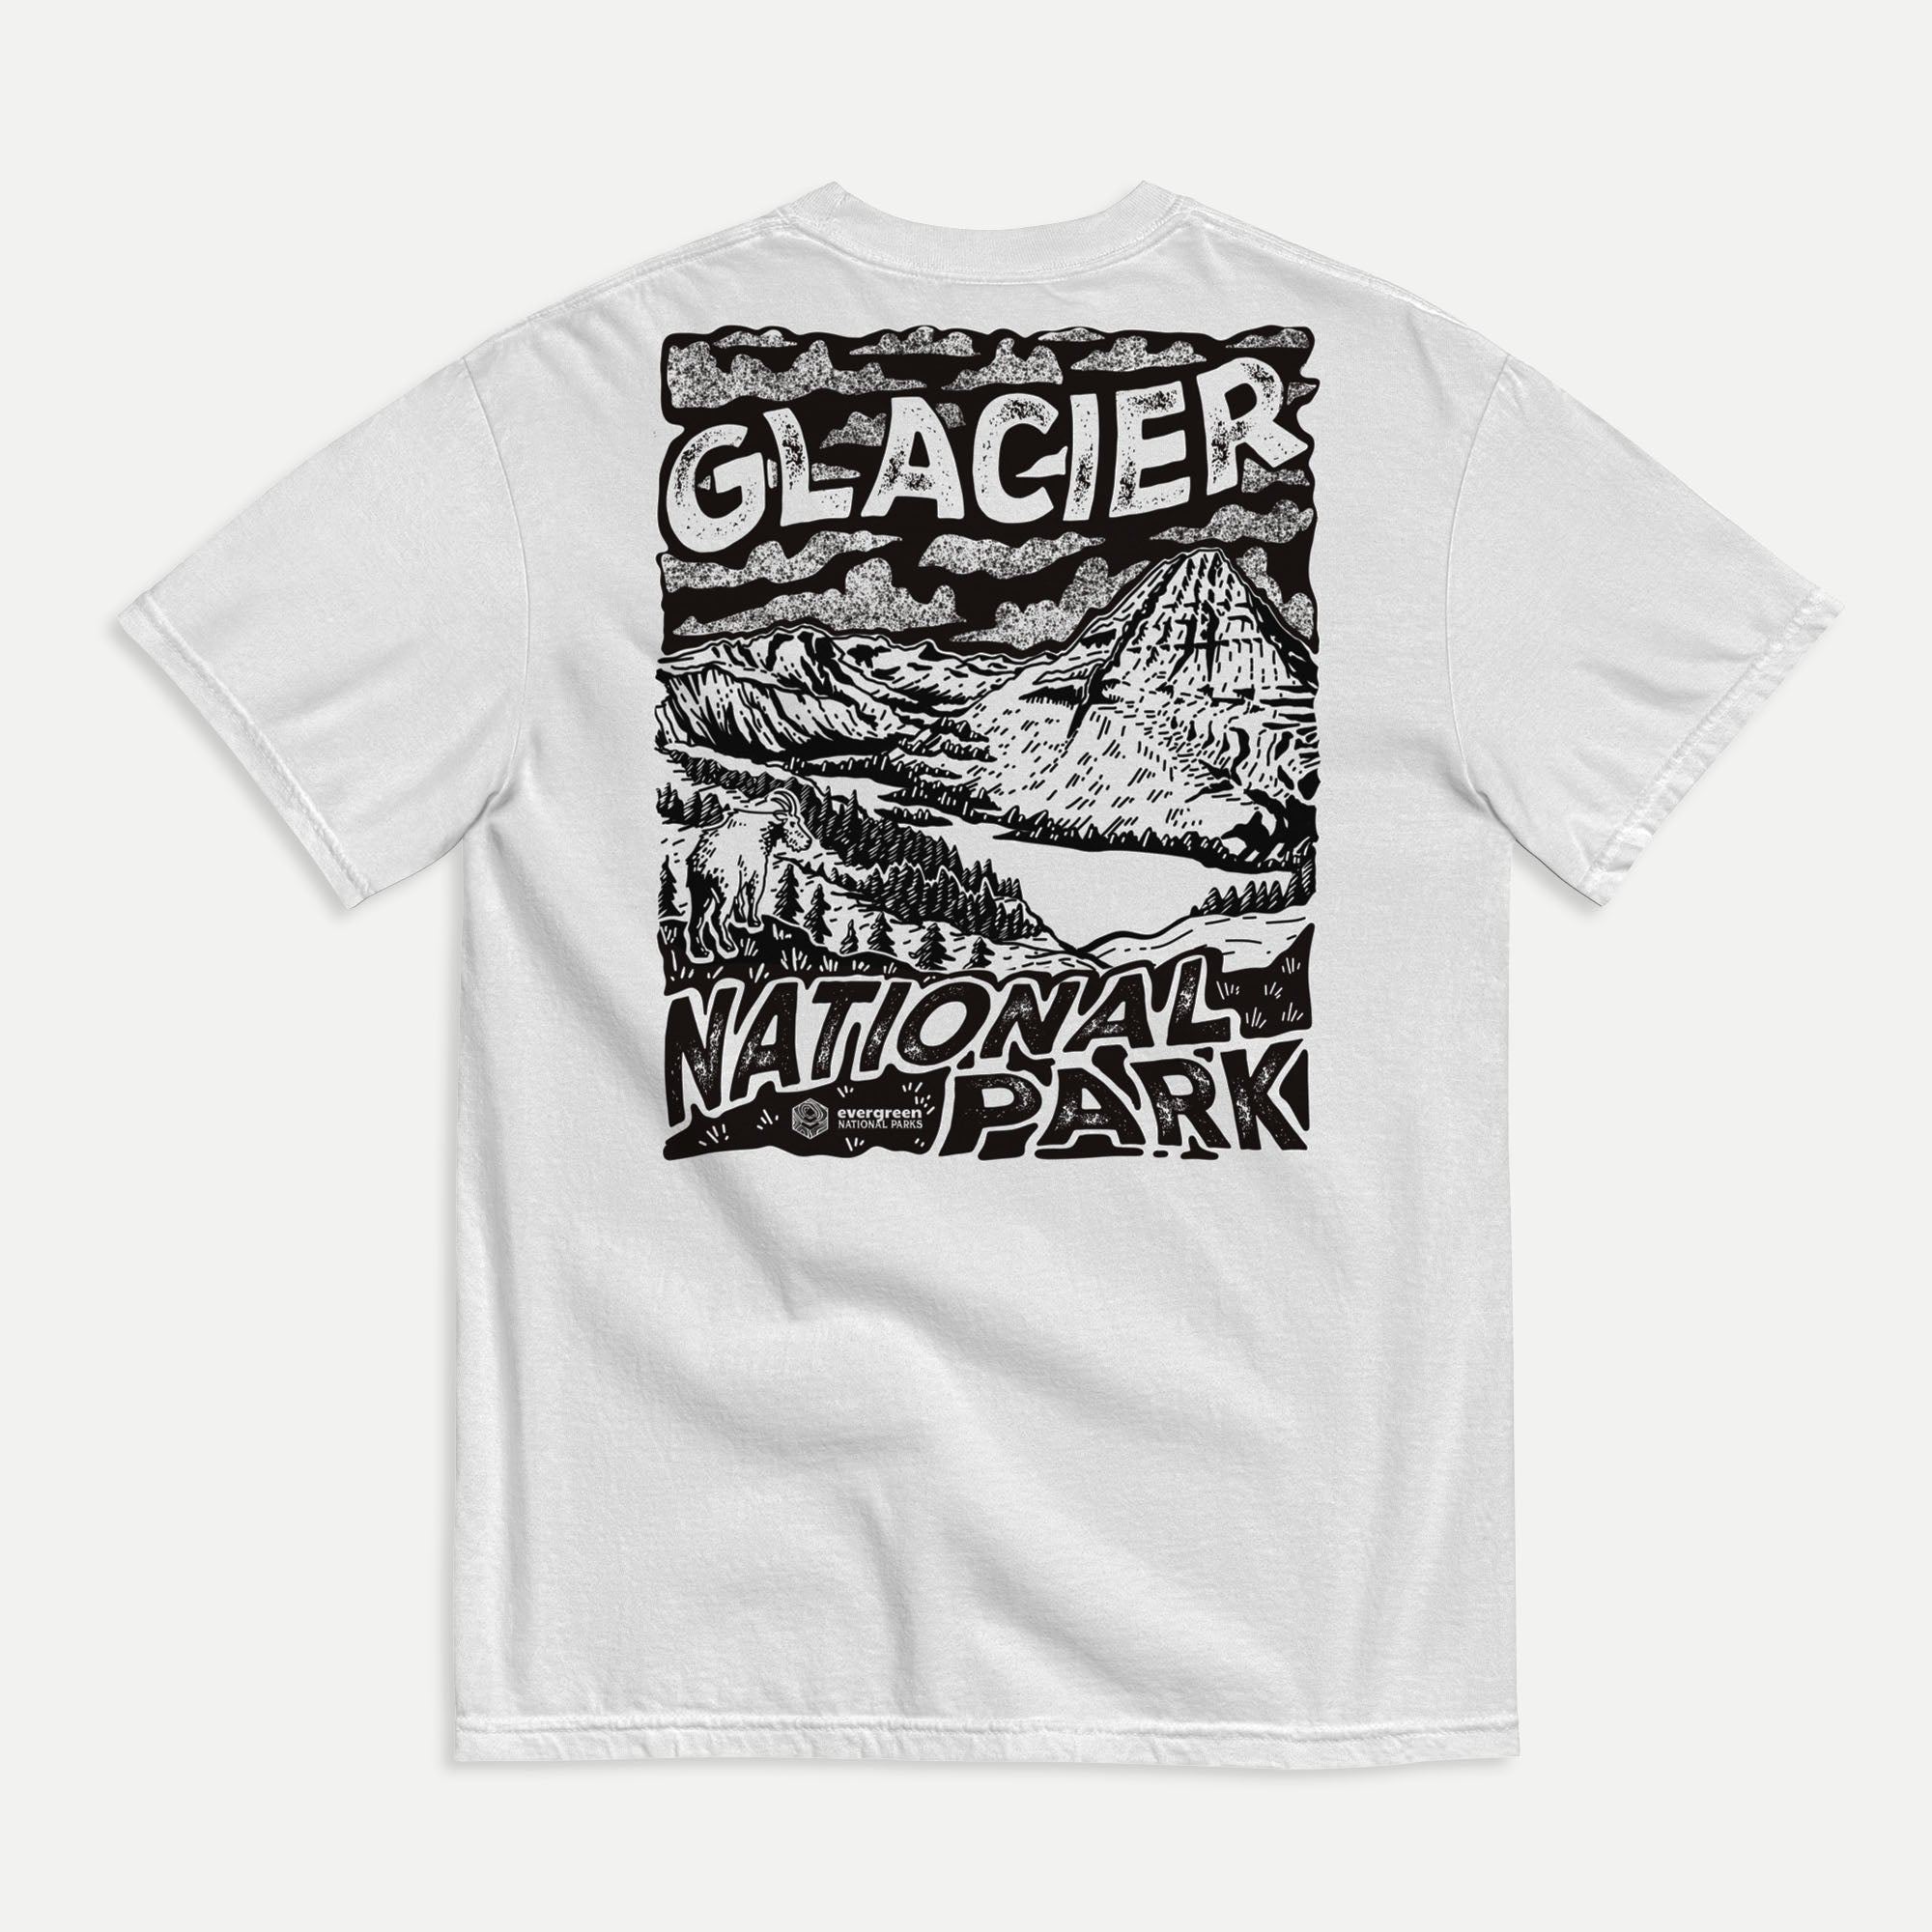 Glacier National Park (Breathable Relaxed Fit T-shirt)